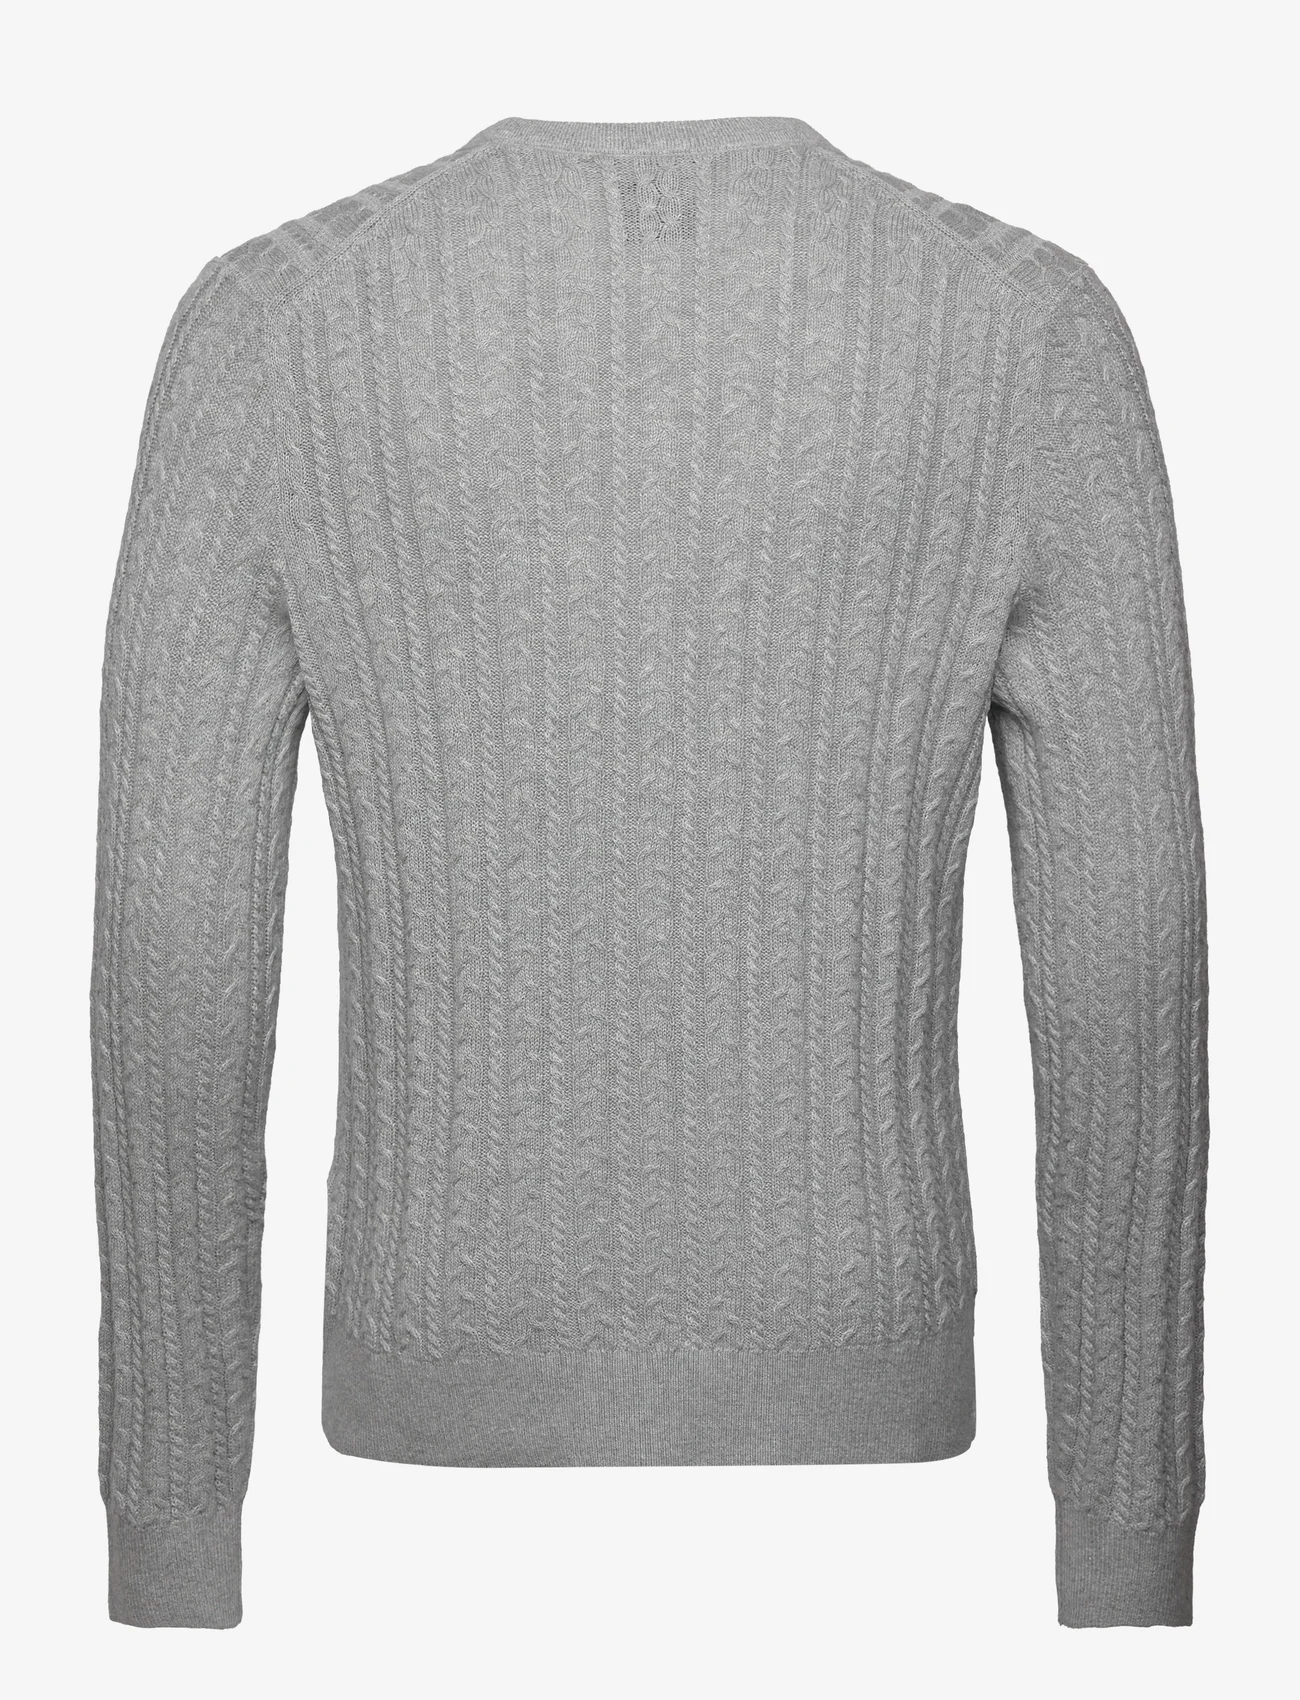 Abercrombie & Fitch - ANF MENS SWEATERS - megztinis su apvalios formos apykakle - light gray heather - 1